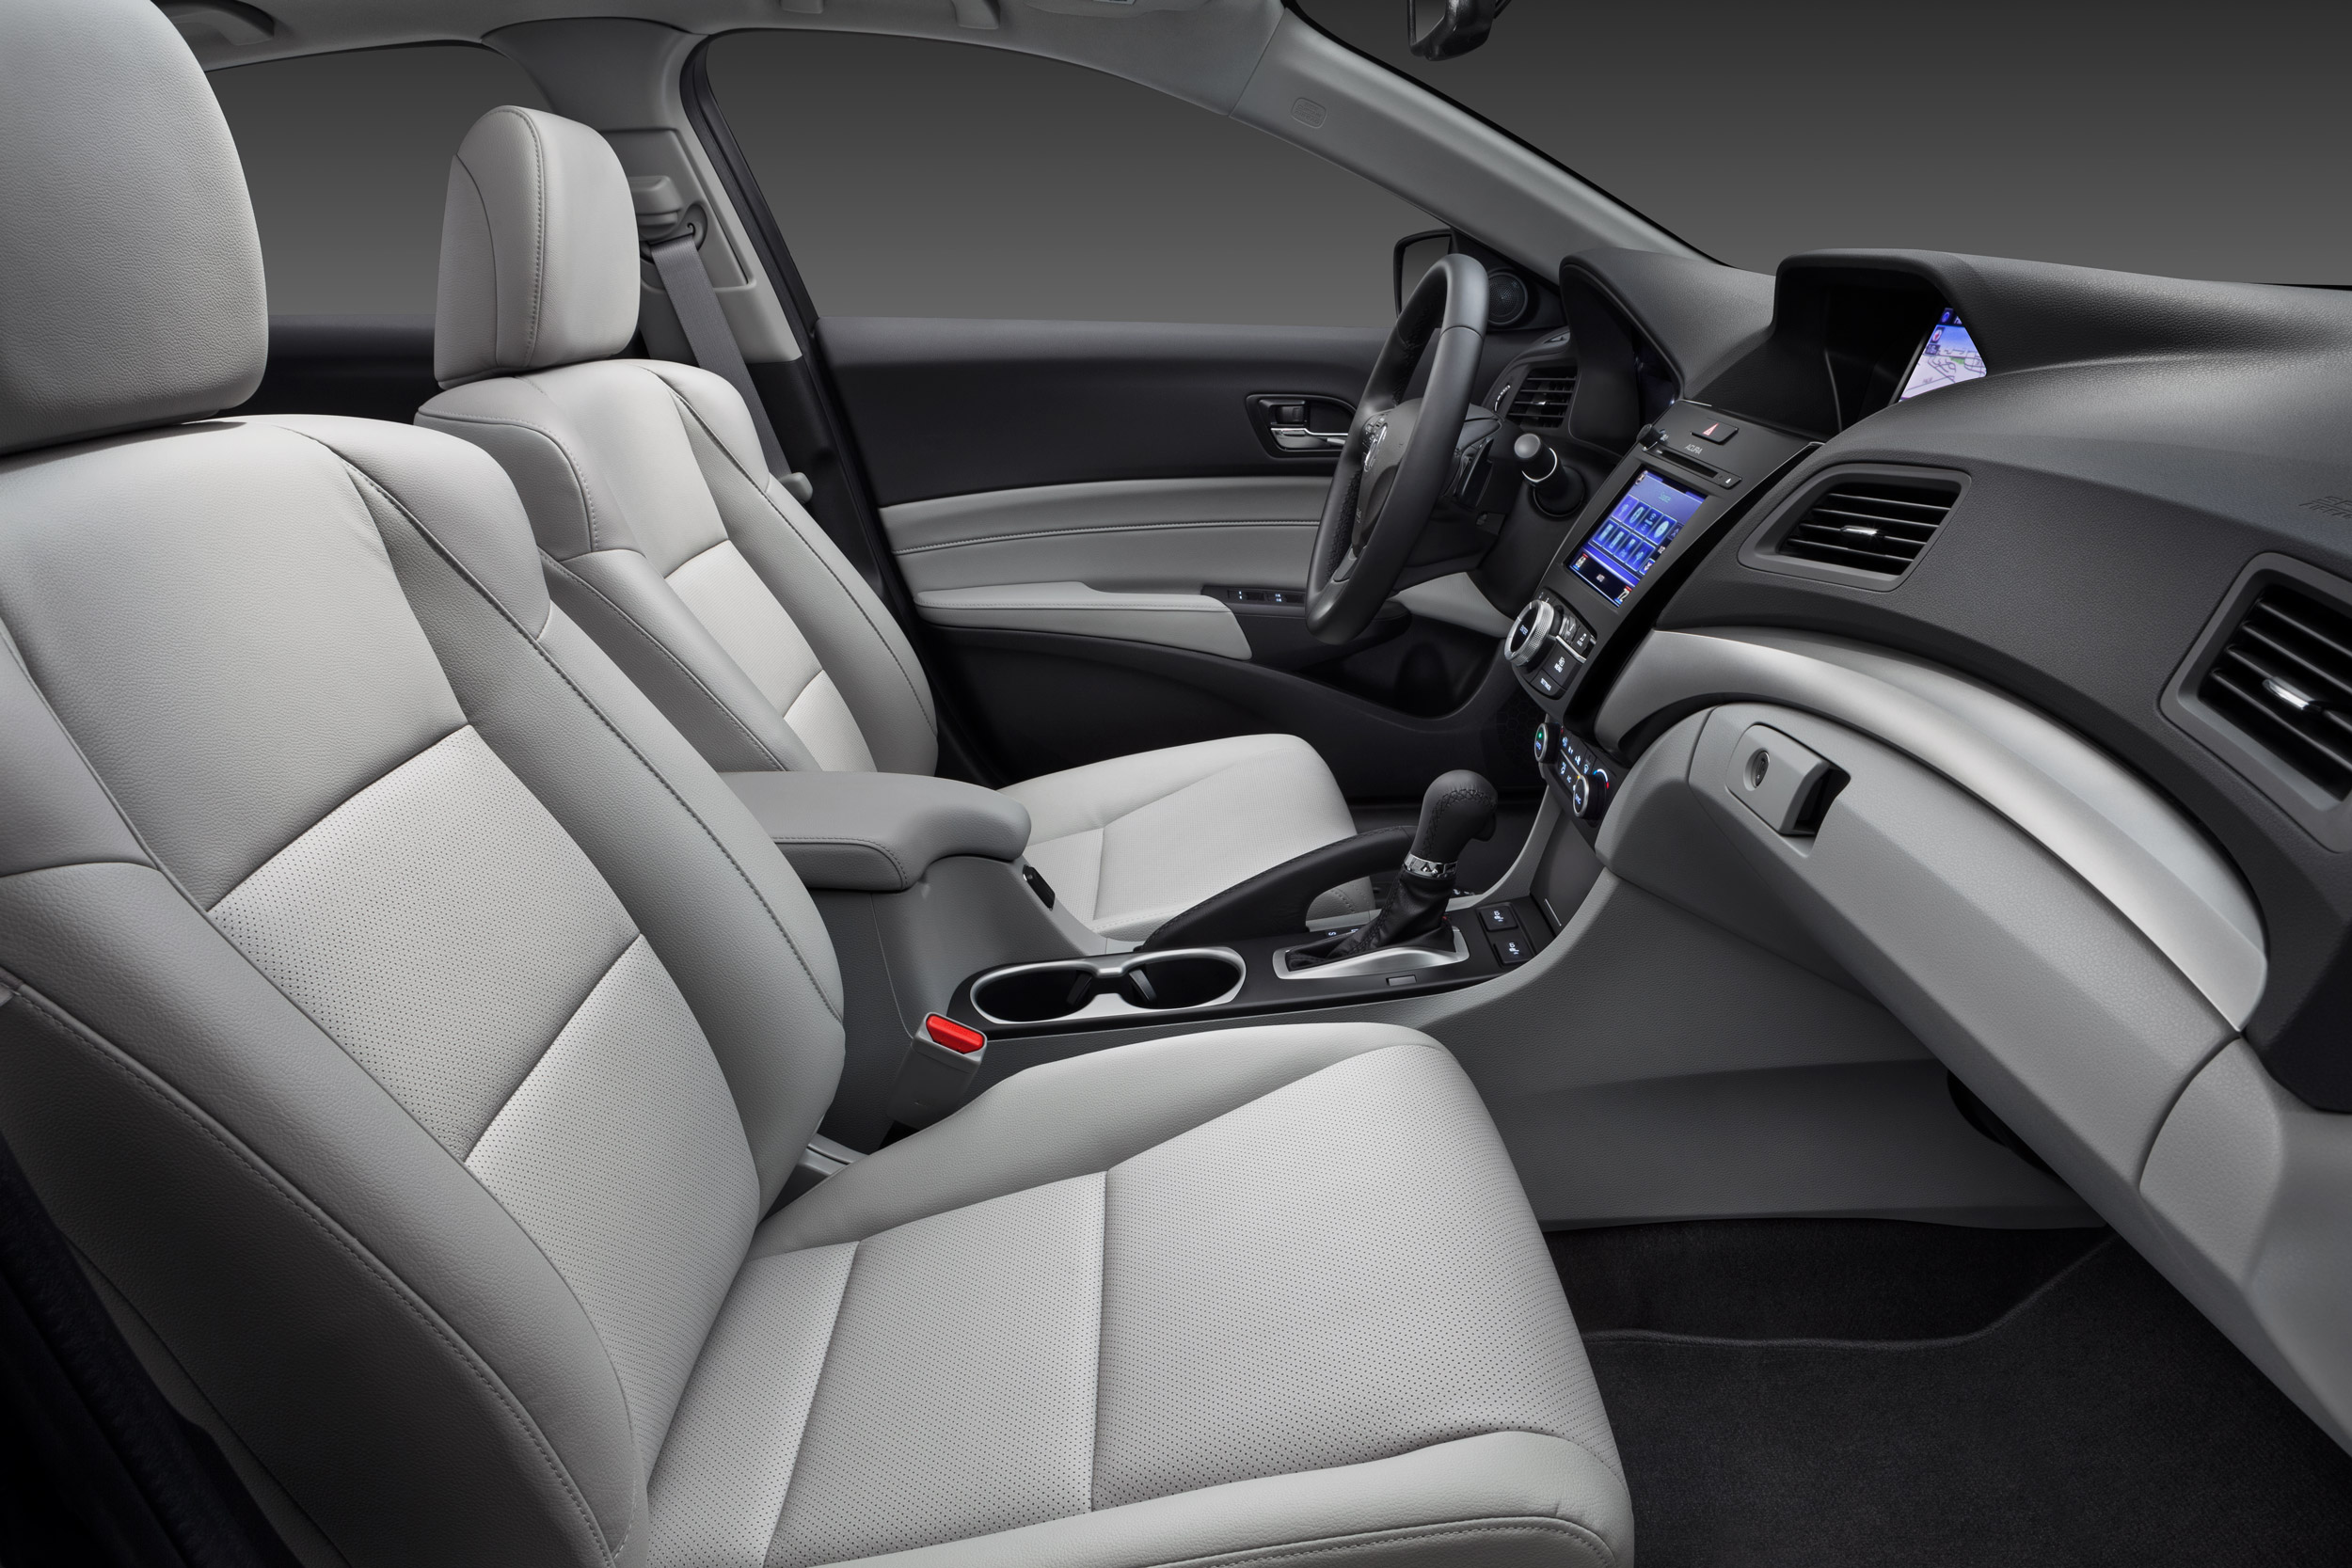 John Early High-End Digital Retouching - Acura ILX Interior From Passenger Side View Shot In Studio